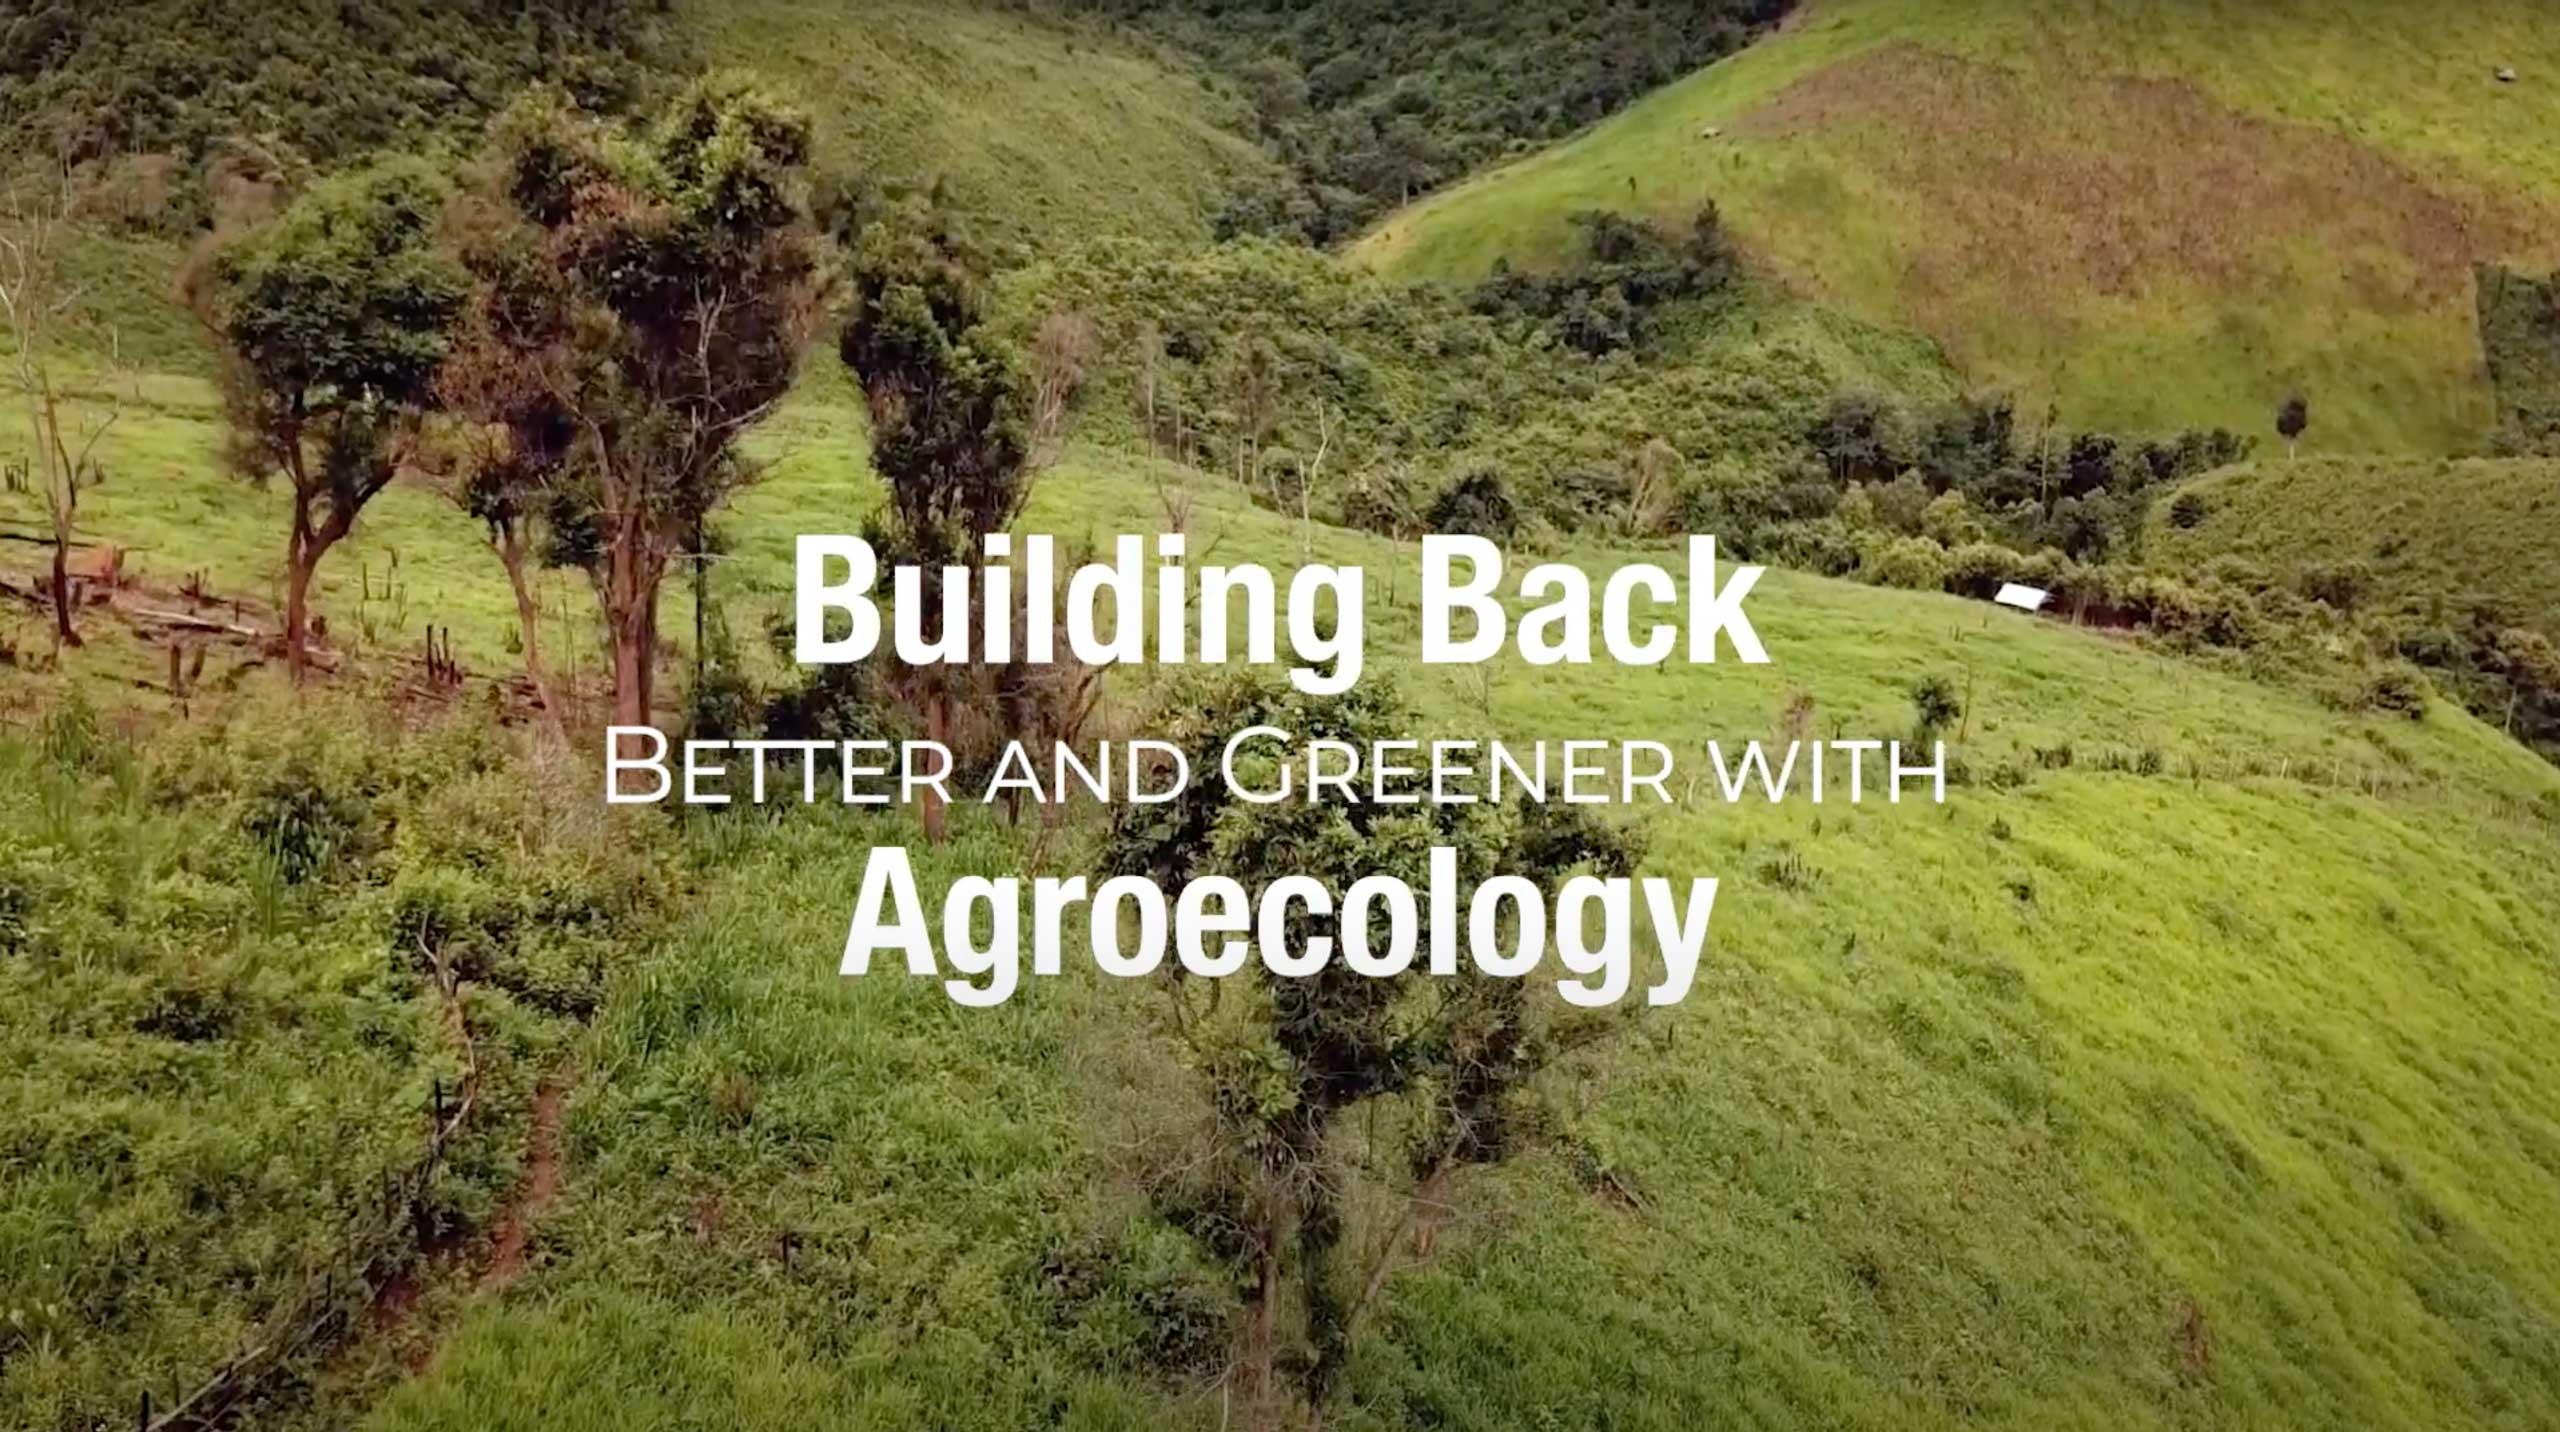 Building Back Better and Greener with Agroecology